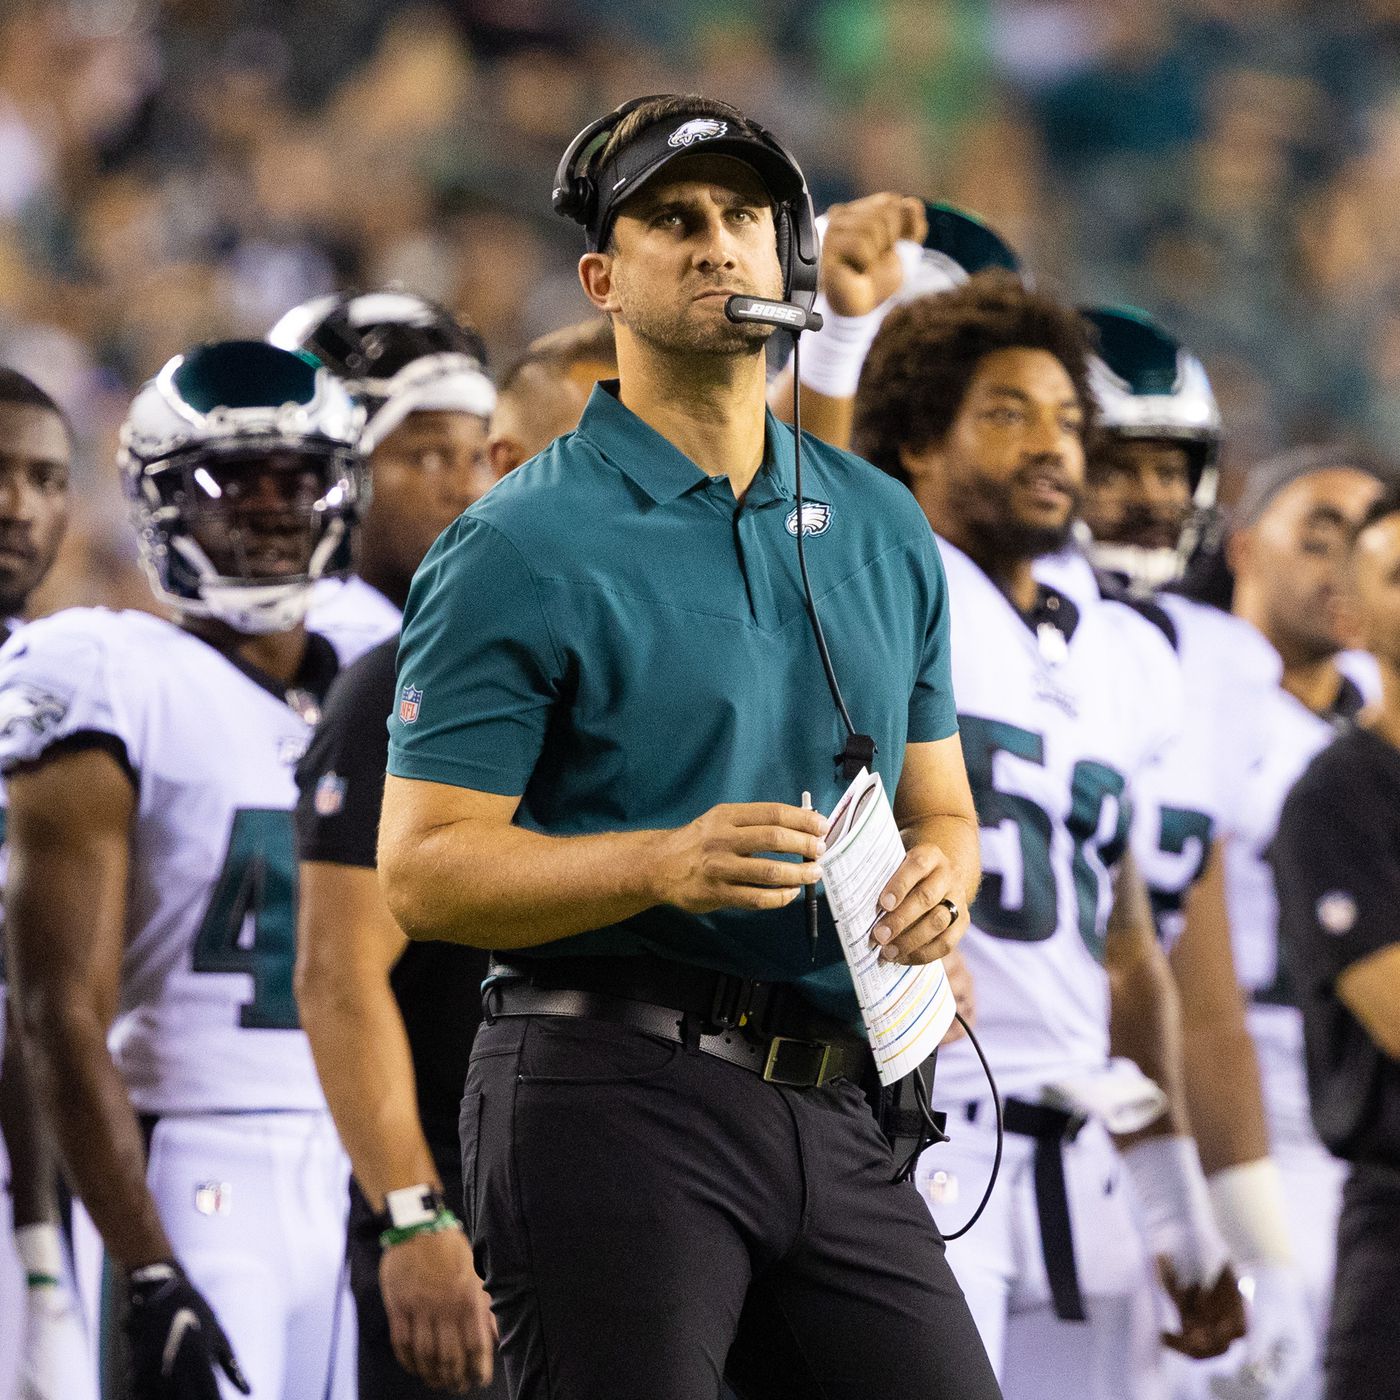 Eagles Vs Patriots Preseason 2021 Game Time Tv Schedule Free Streaming Channel And More Bleeding Green Nation